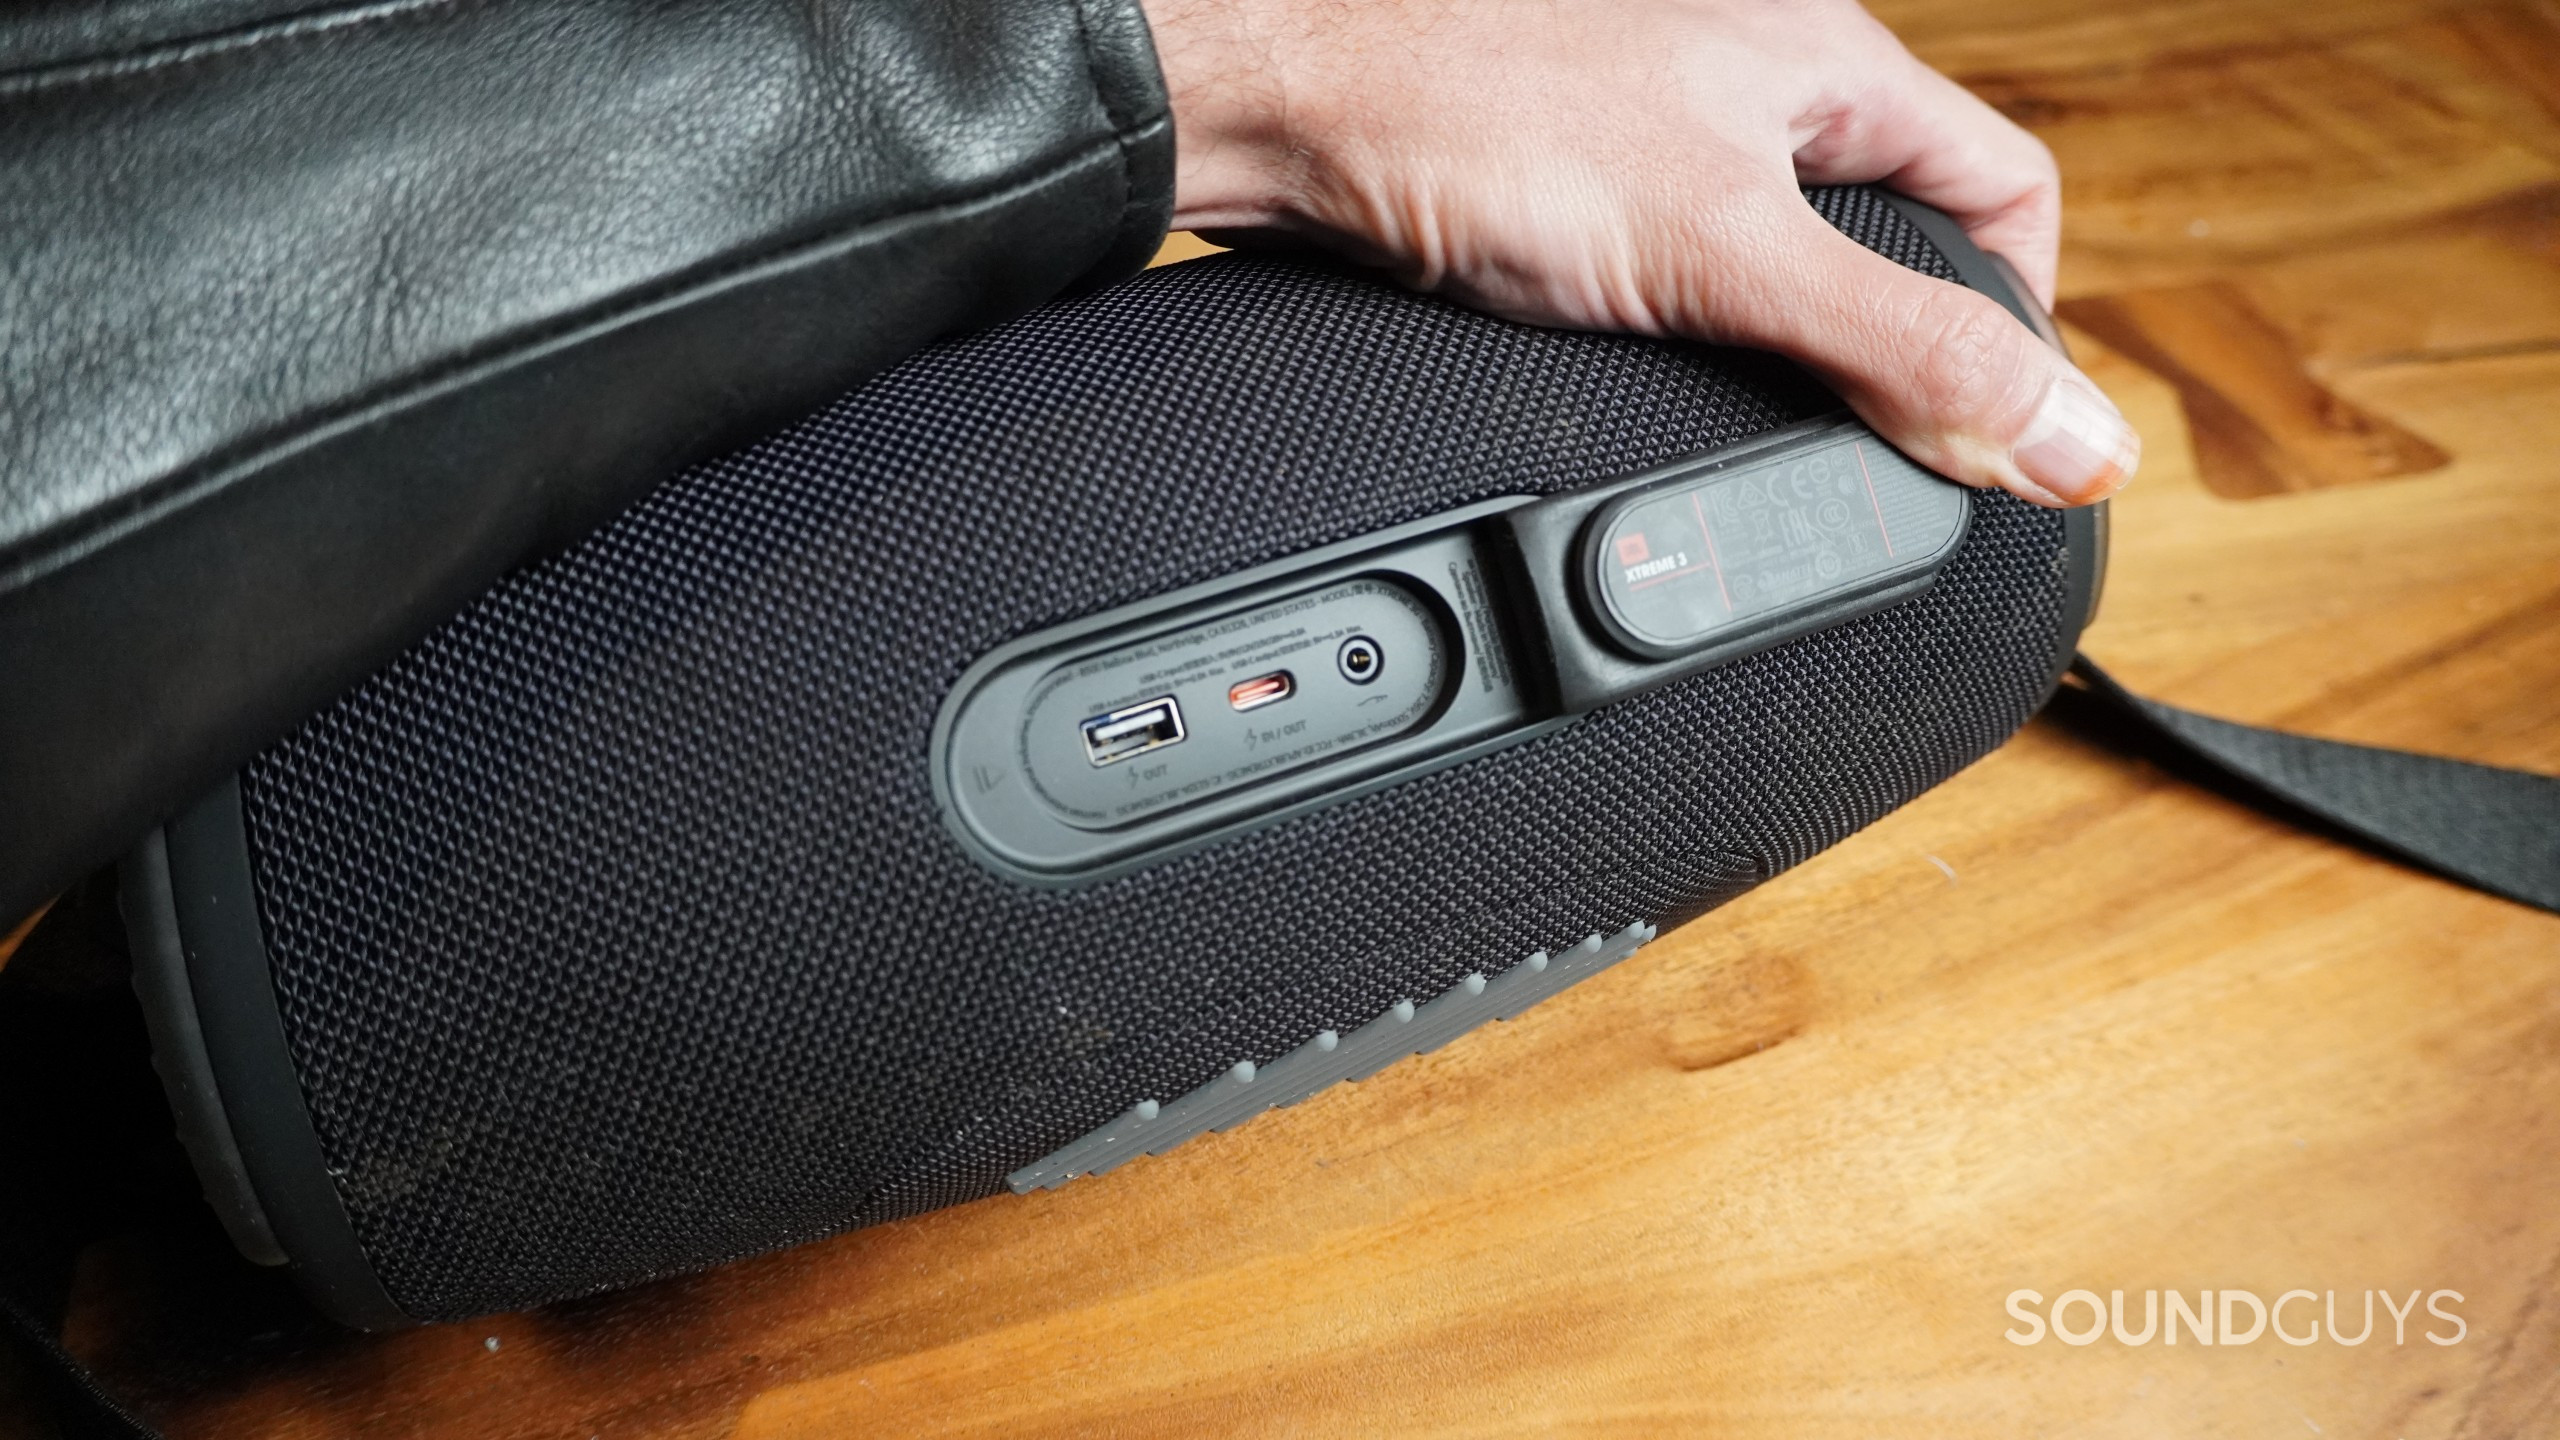 The JBL Xtreme 3 Bluetooth speaker showing its back flap being held open by a hand exposing the ports.